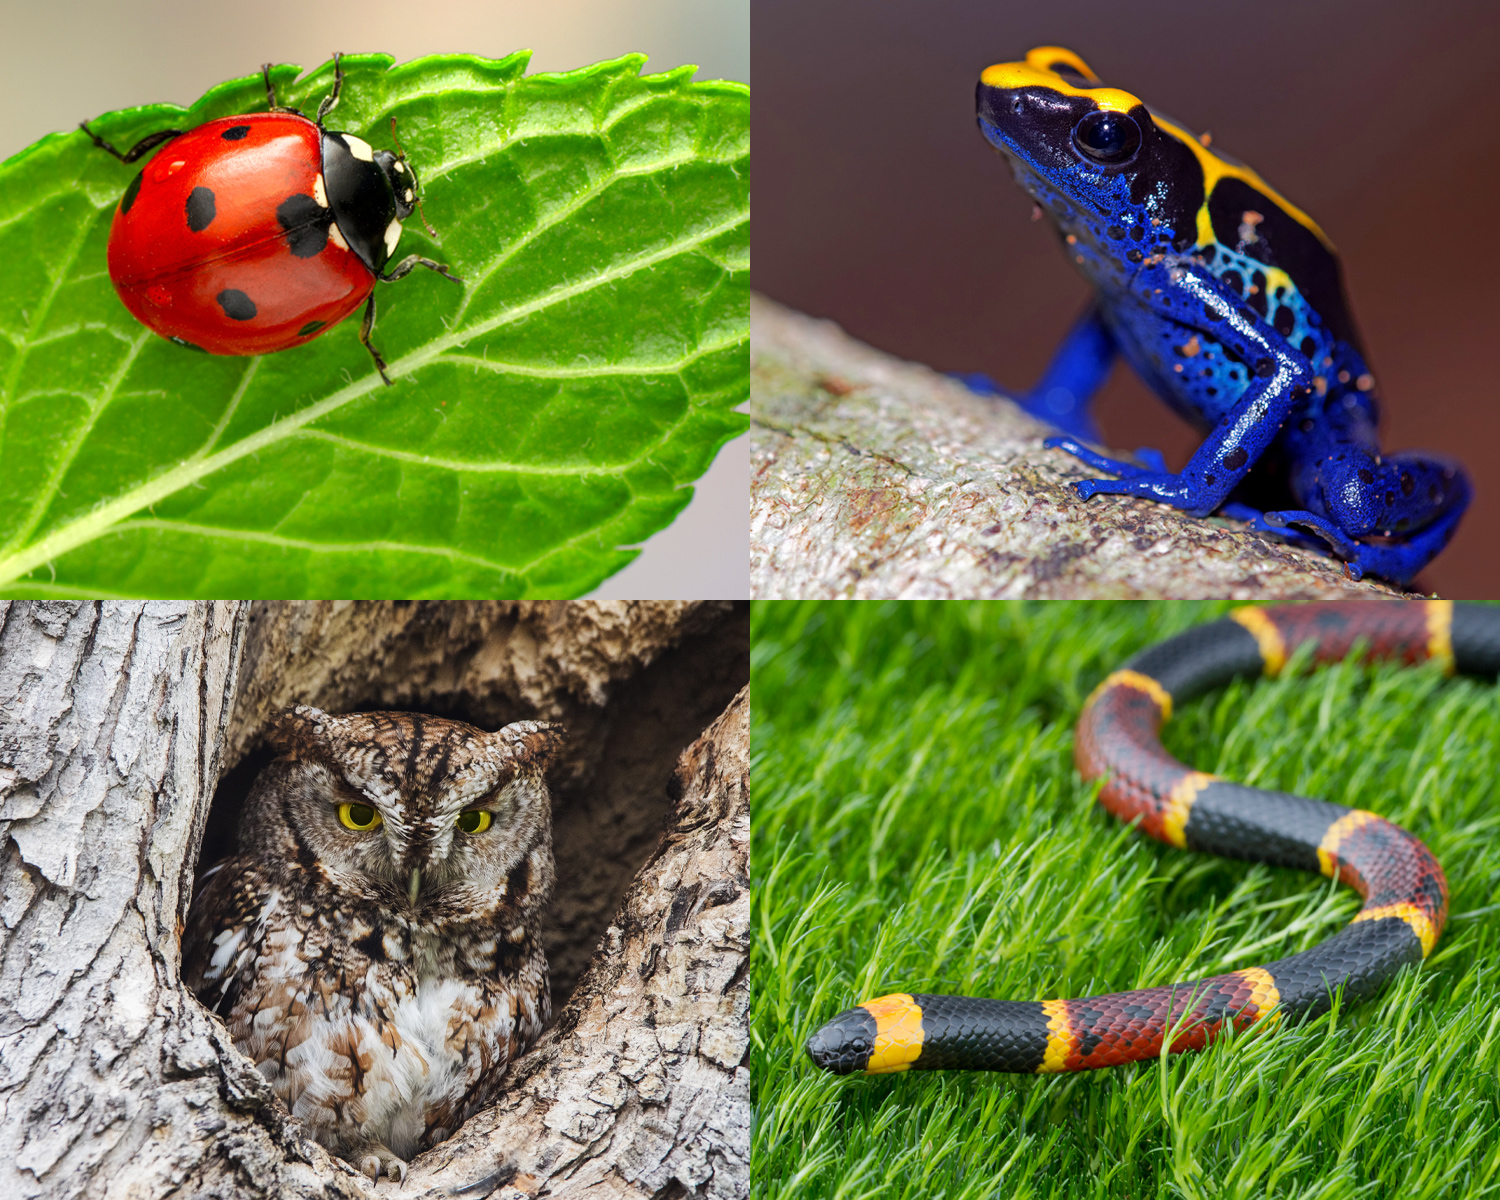 A ladybug on a leaf, a poison dart frog on a log, an eastern coral snake in grass, and a screech owl in a hollow tree trunk.